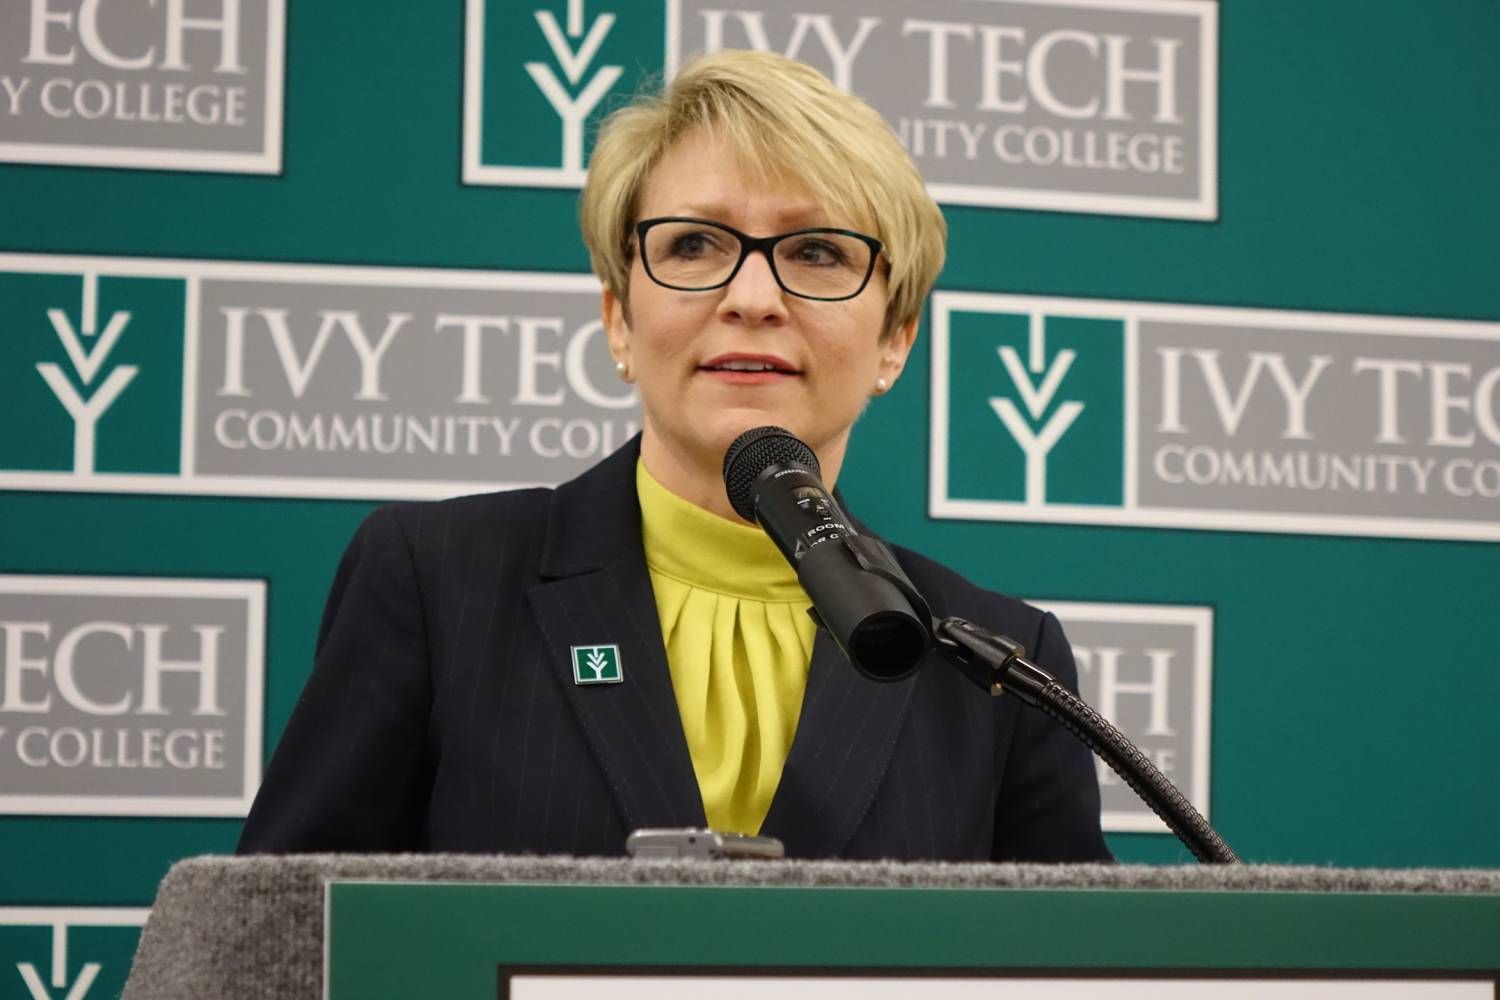 Sue Ellspermann became Ivy Tech president in 2016, leaving her role as Indiana's lieutenant governor.